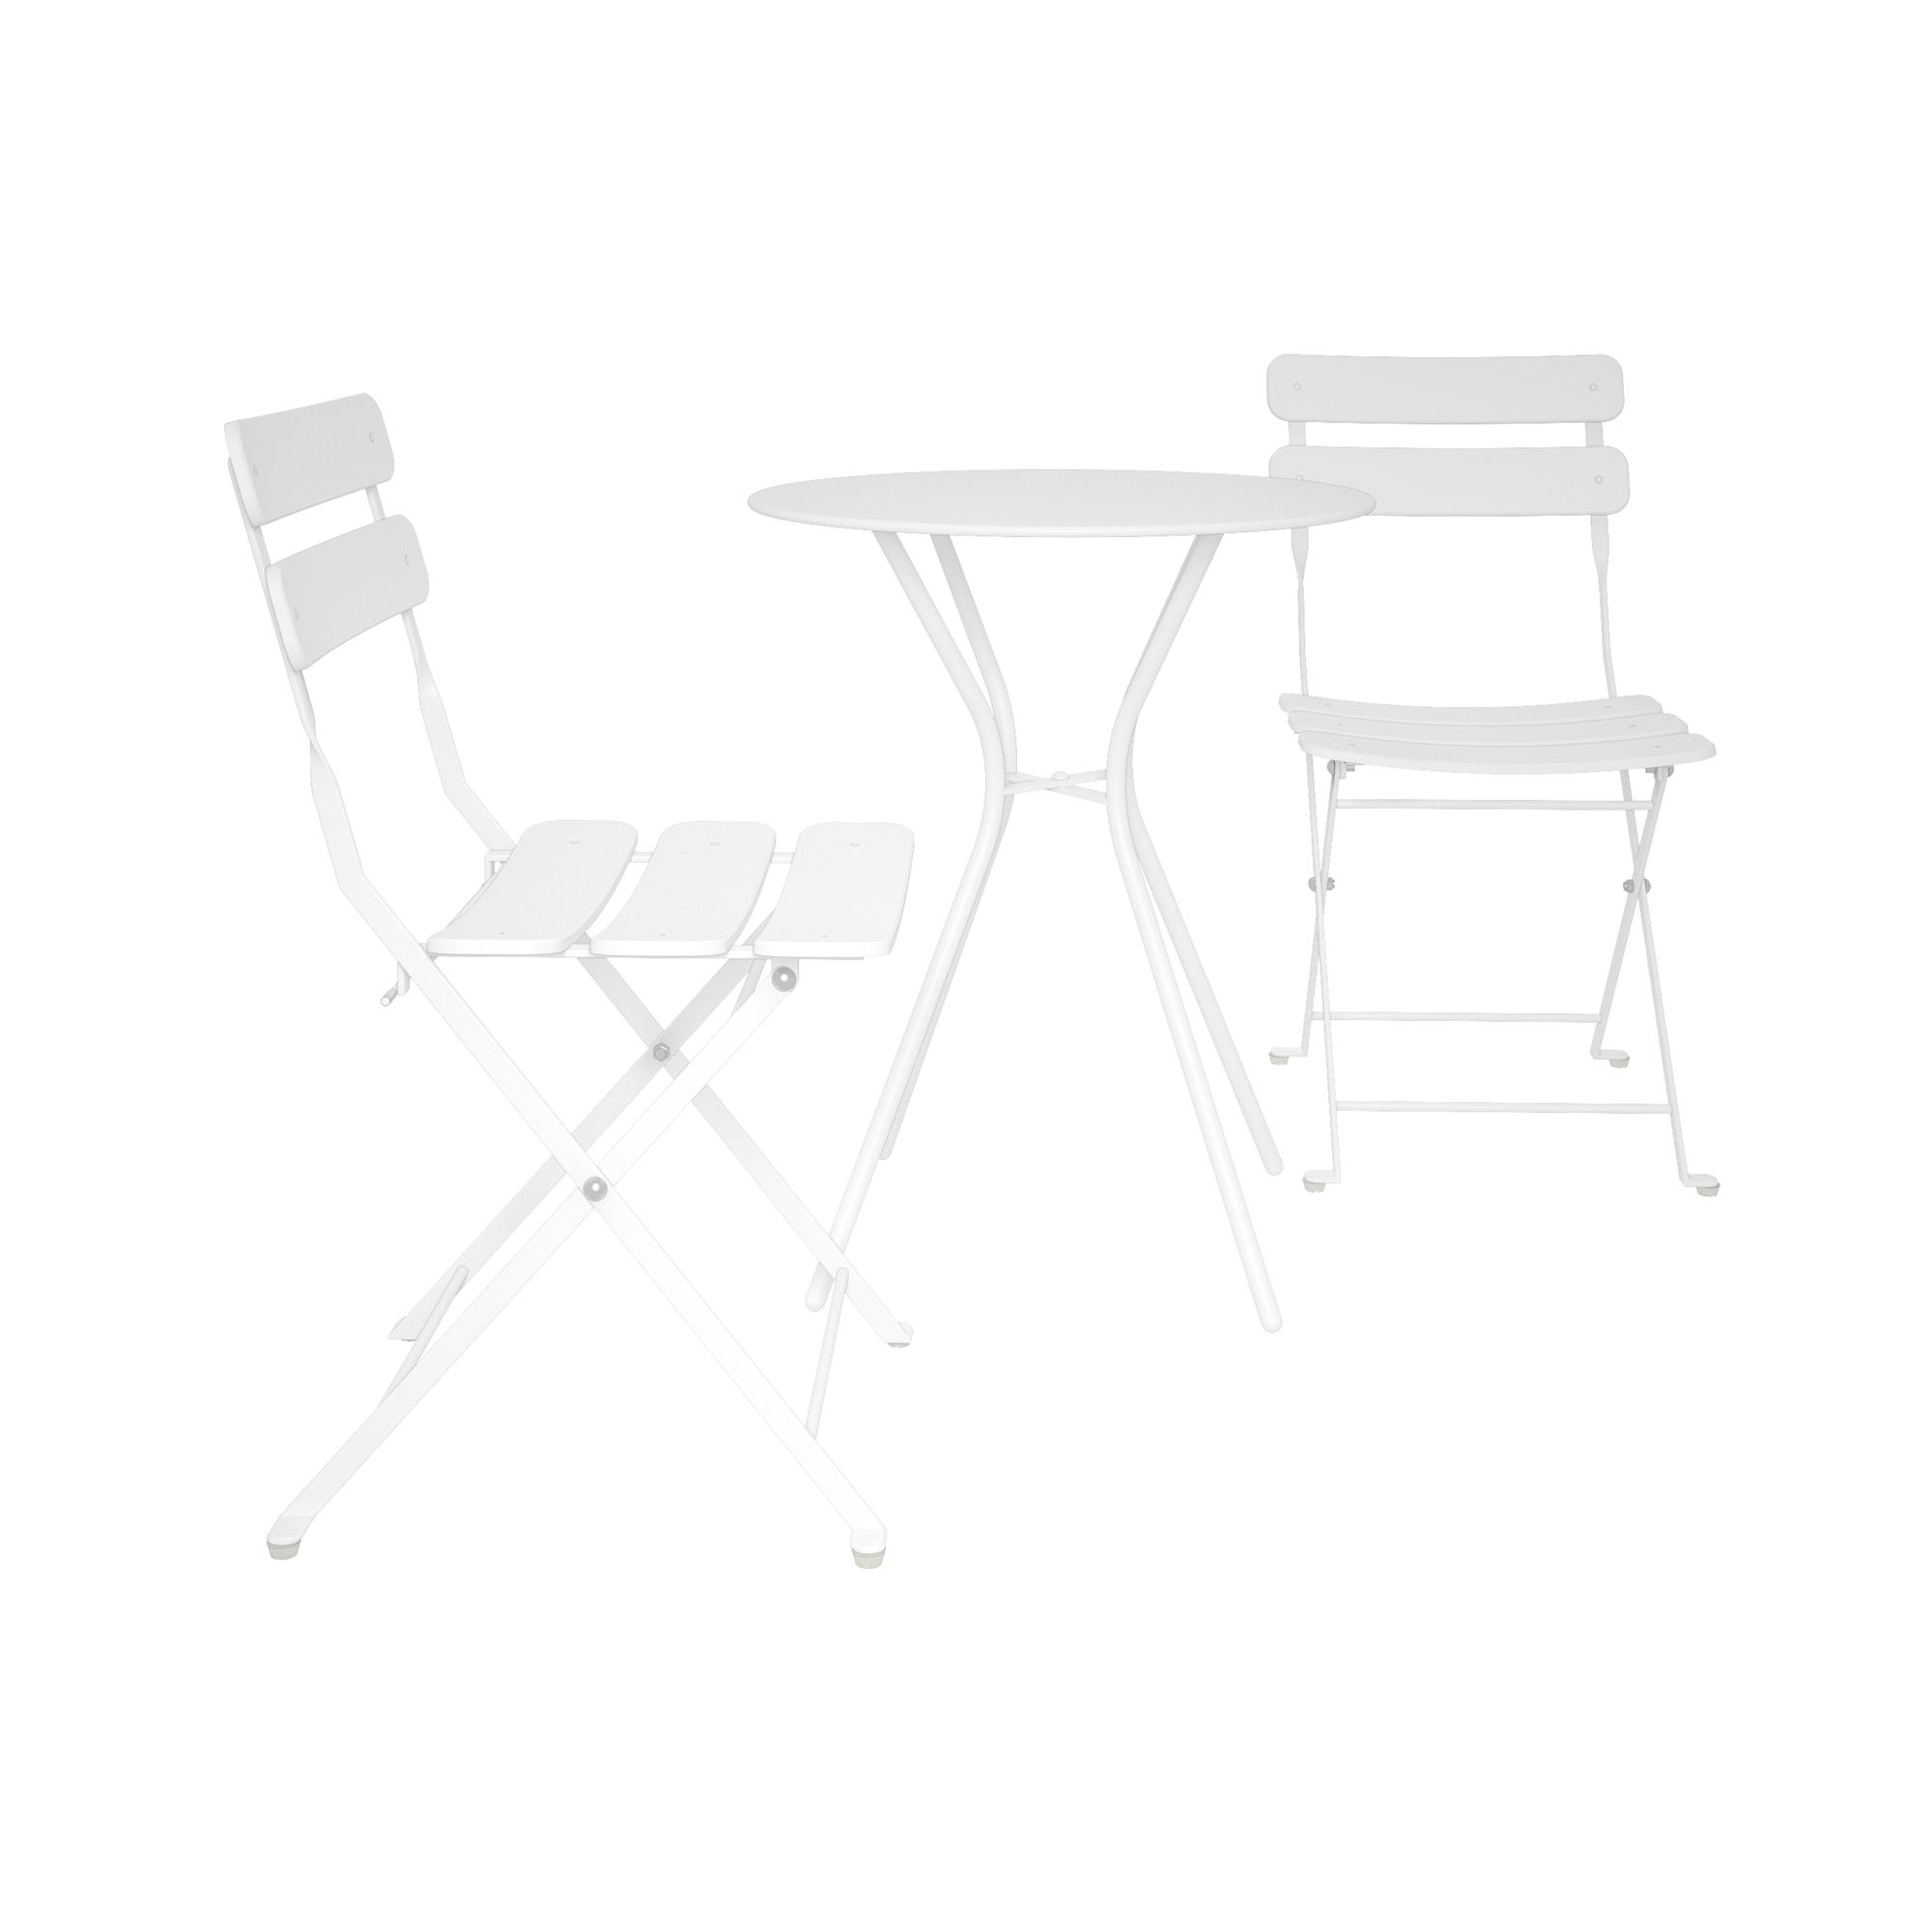 COSCO Outdoor Living, 3 Piece Bistro Set with 2 Folding Chairs, White - image 4 of 7